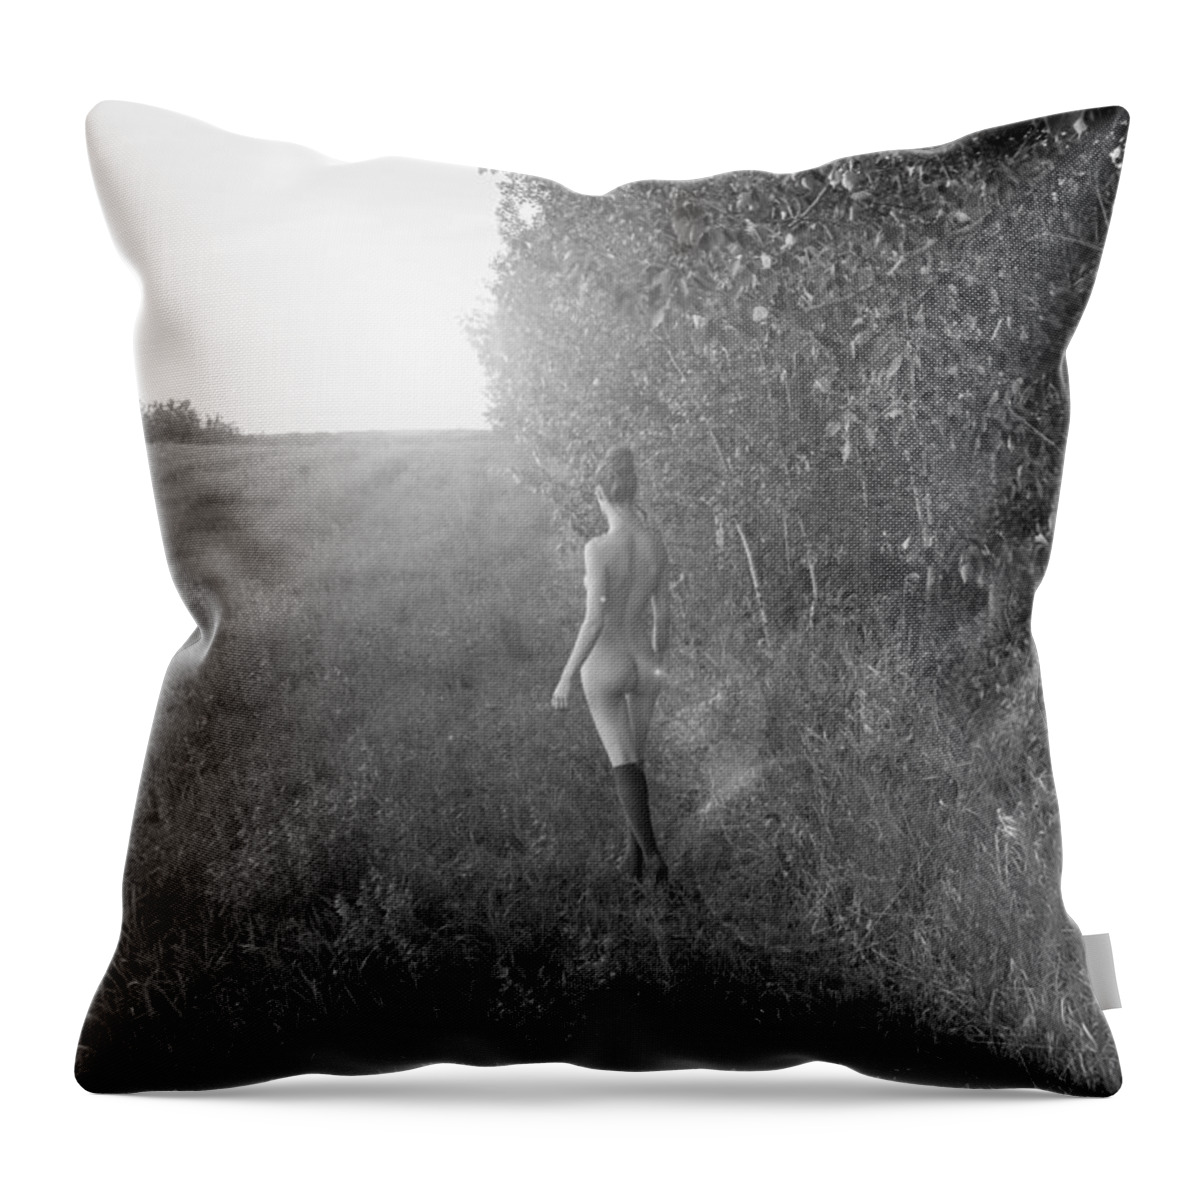 Blue Muse Fine Art Throw Pillow featuring the photograph Nature's Sweet Caress by Blue Muse Fine Art